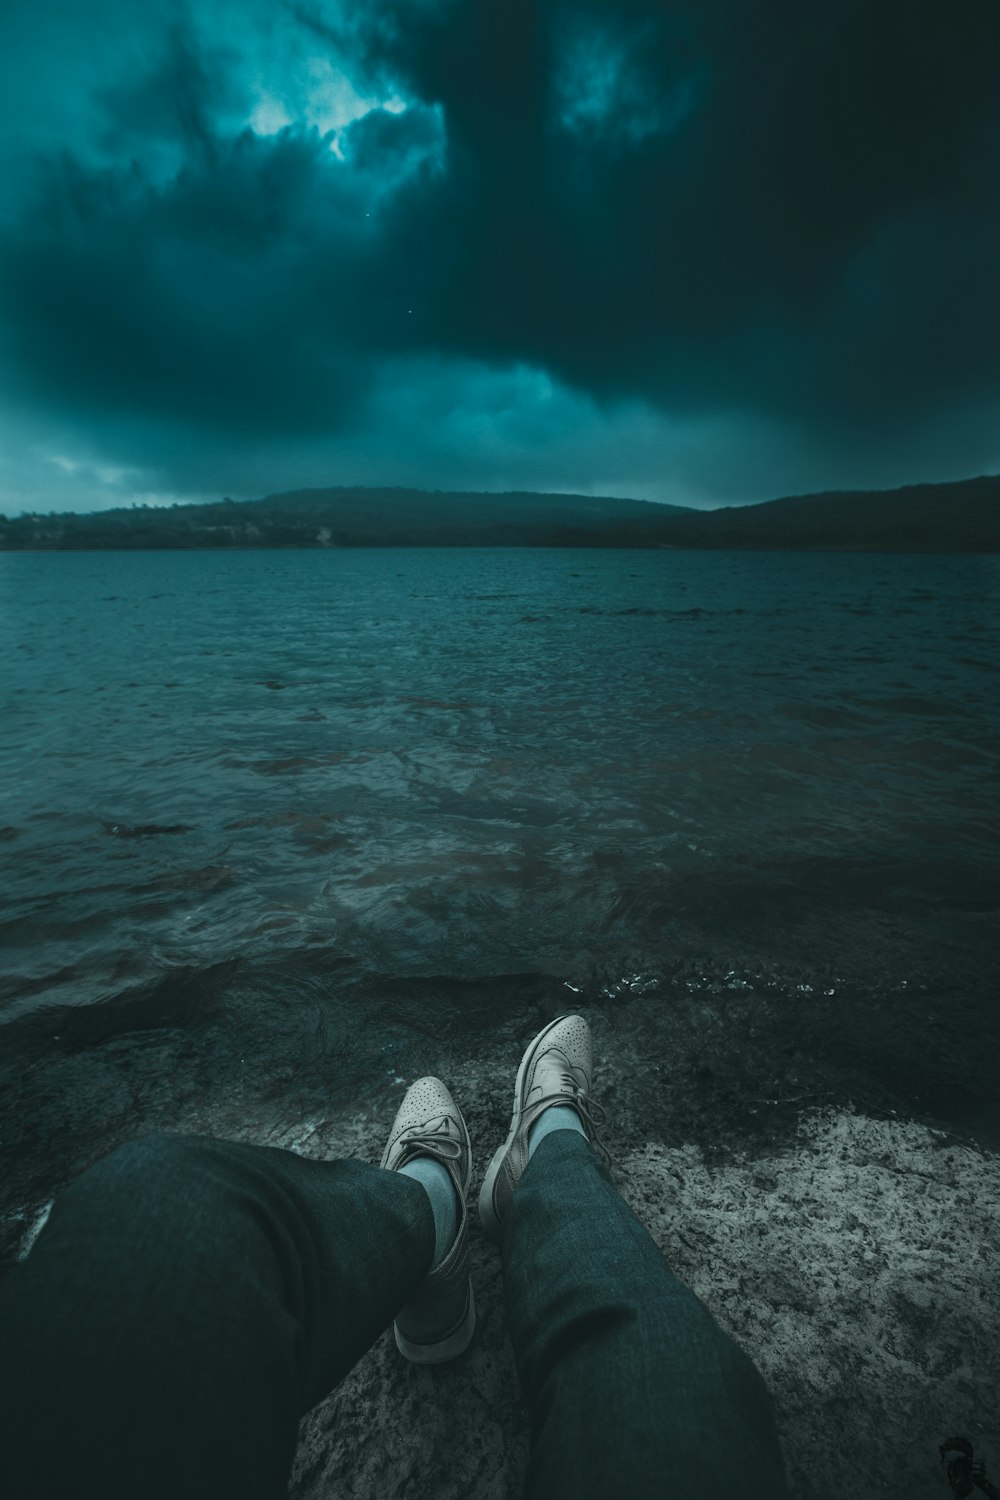 person sitting on rock facing body of water under gray clouds